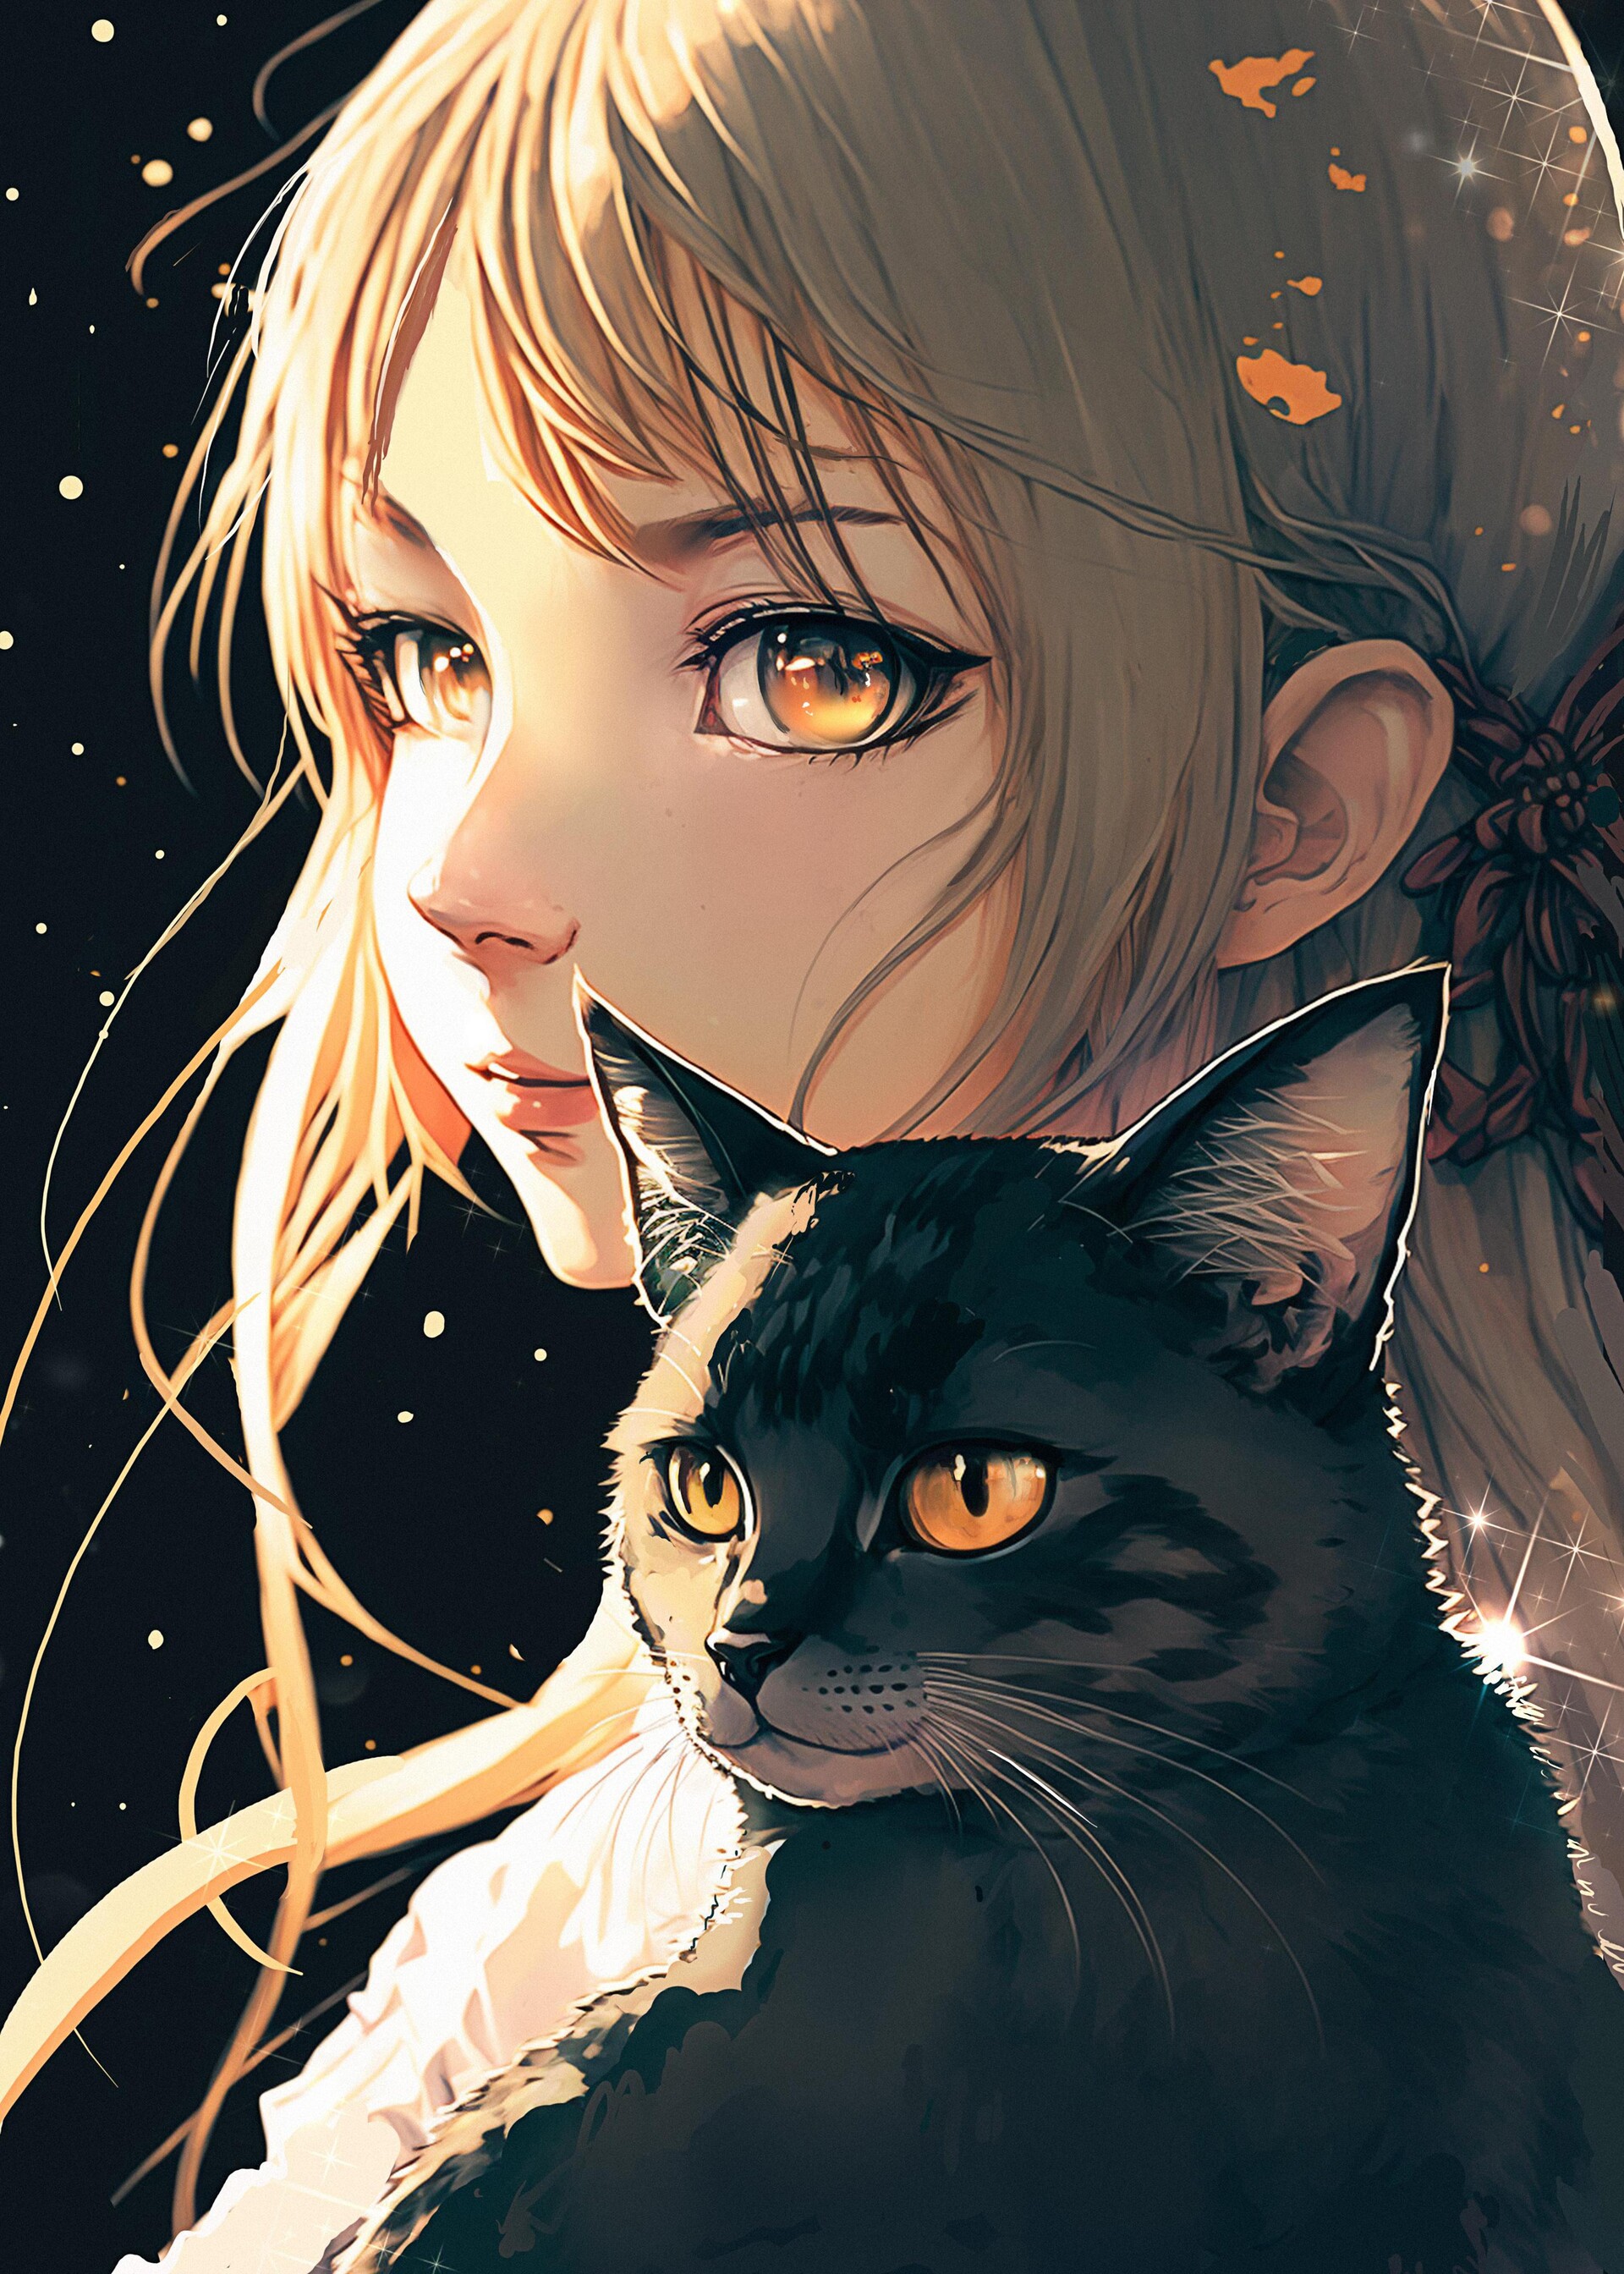 FileAnime Girl with catsvg  Wikimedia Commons